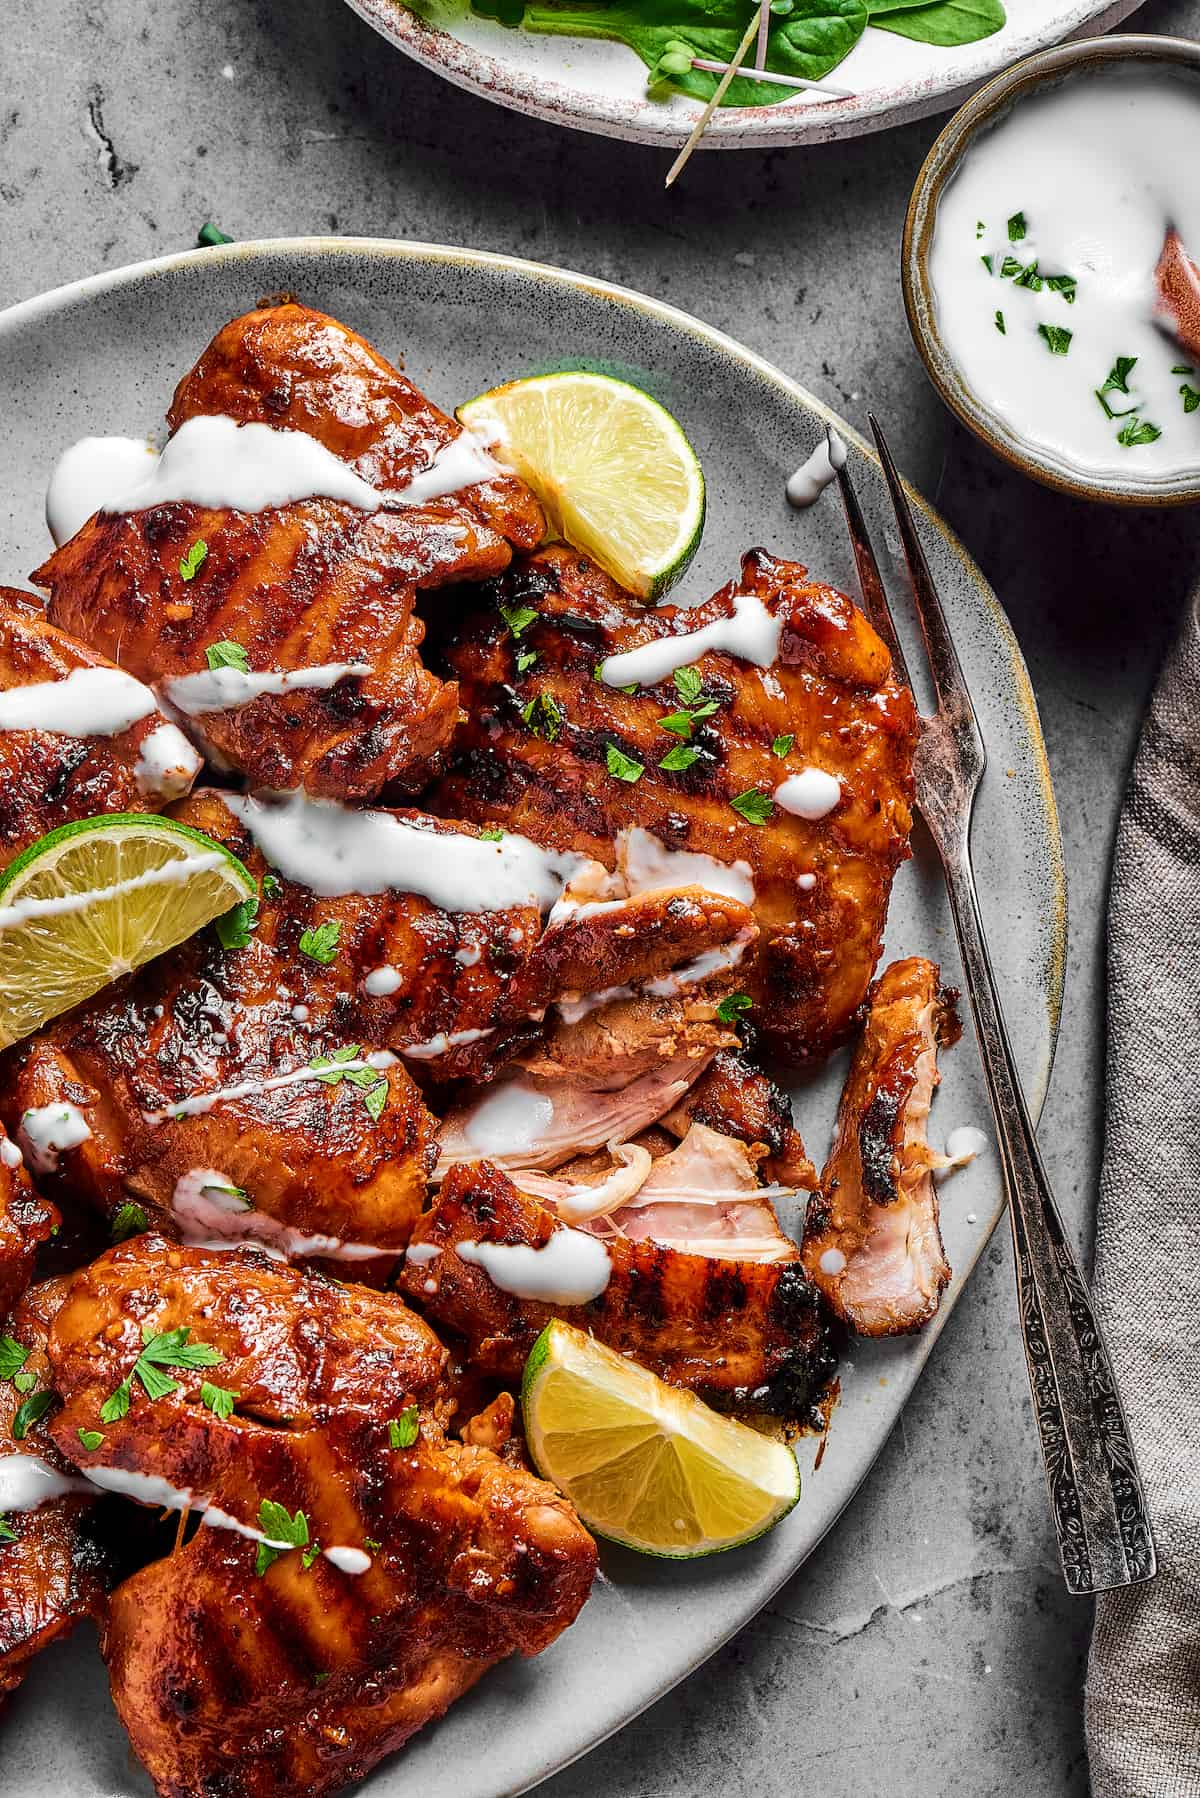 A serving dish of chicken thighs, grilled and garnished with a drizzle of yogurt.